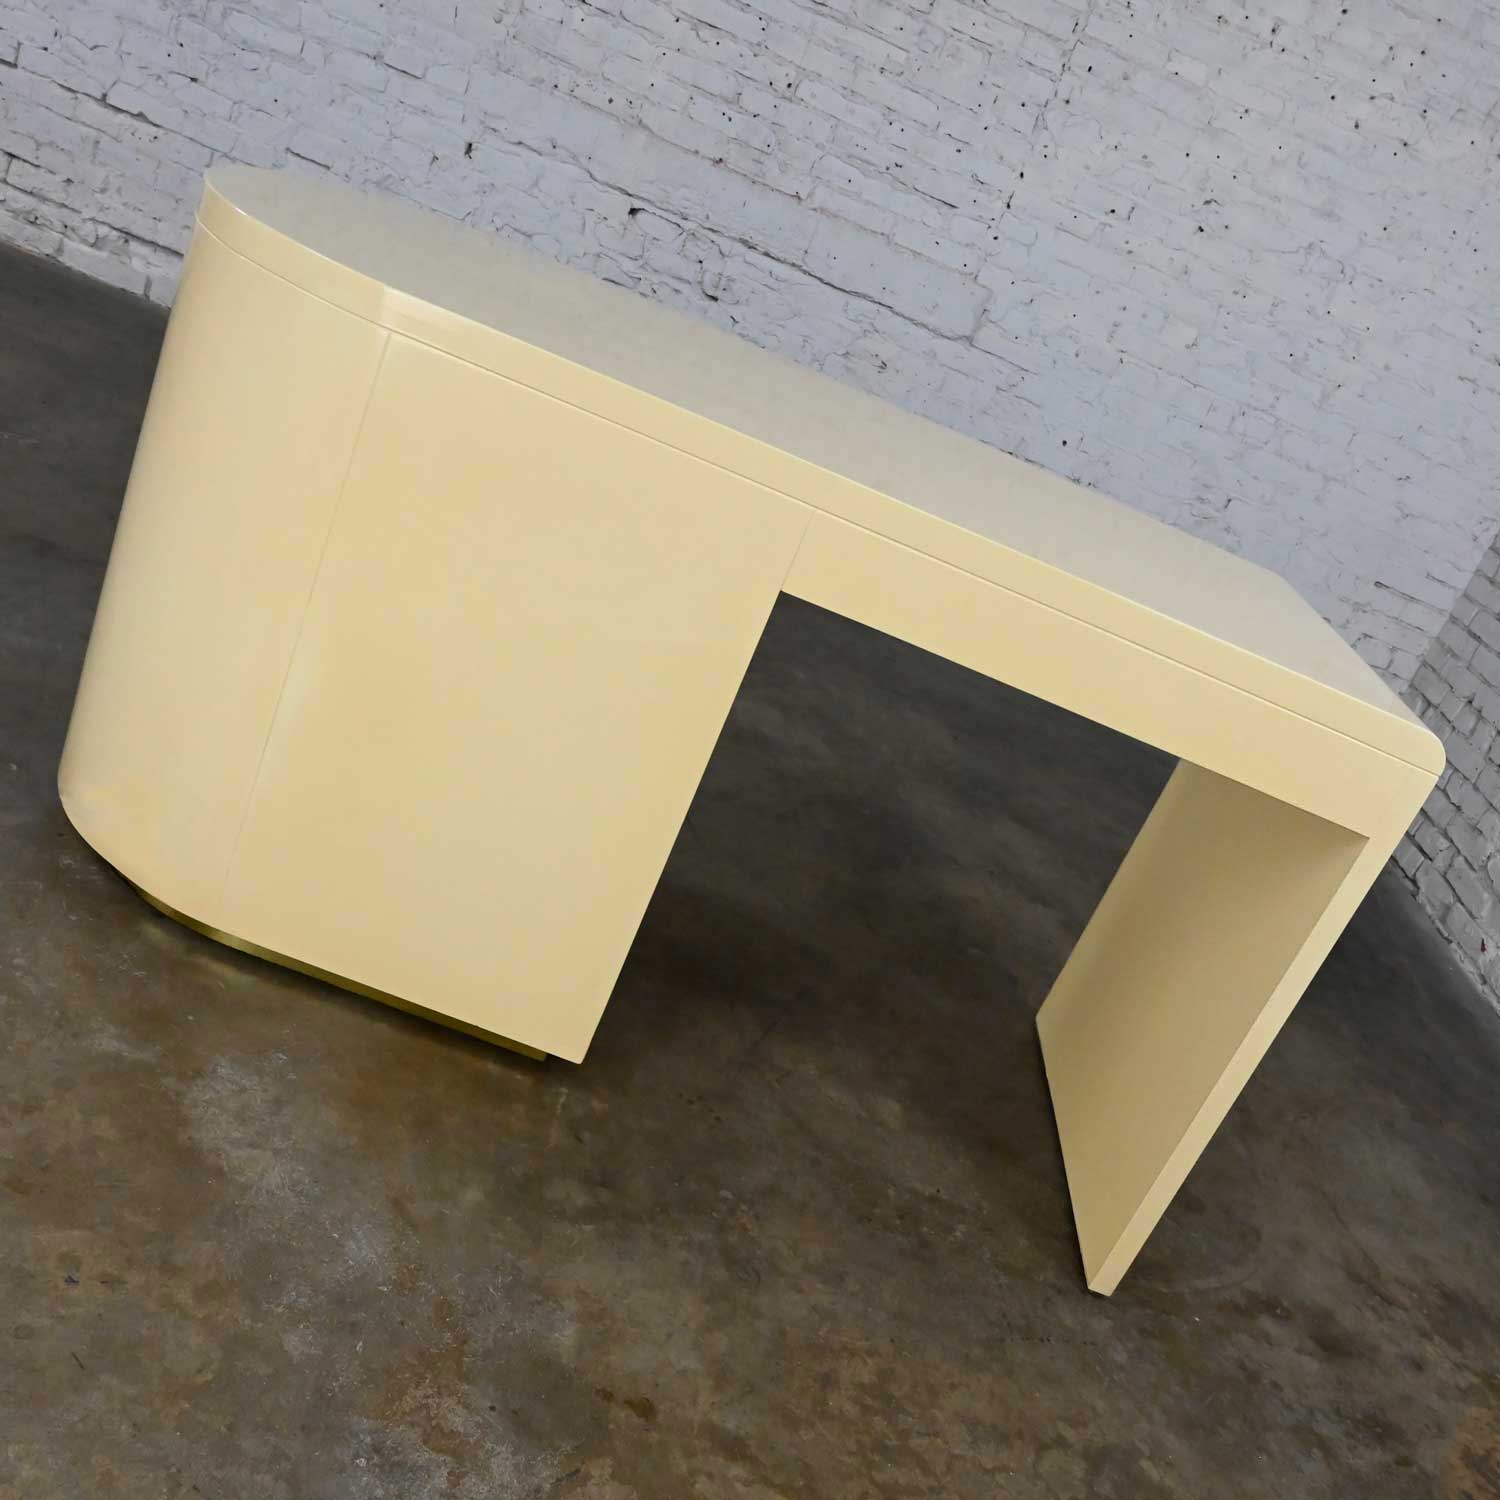 Modern Off White Lacquered Desk Brass Details in the Style of Milo Baughman & Karl Springer